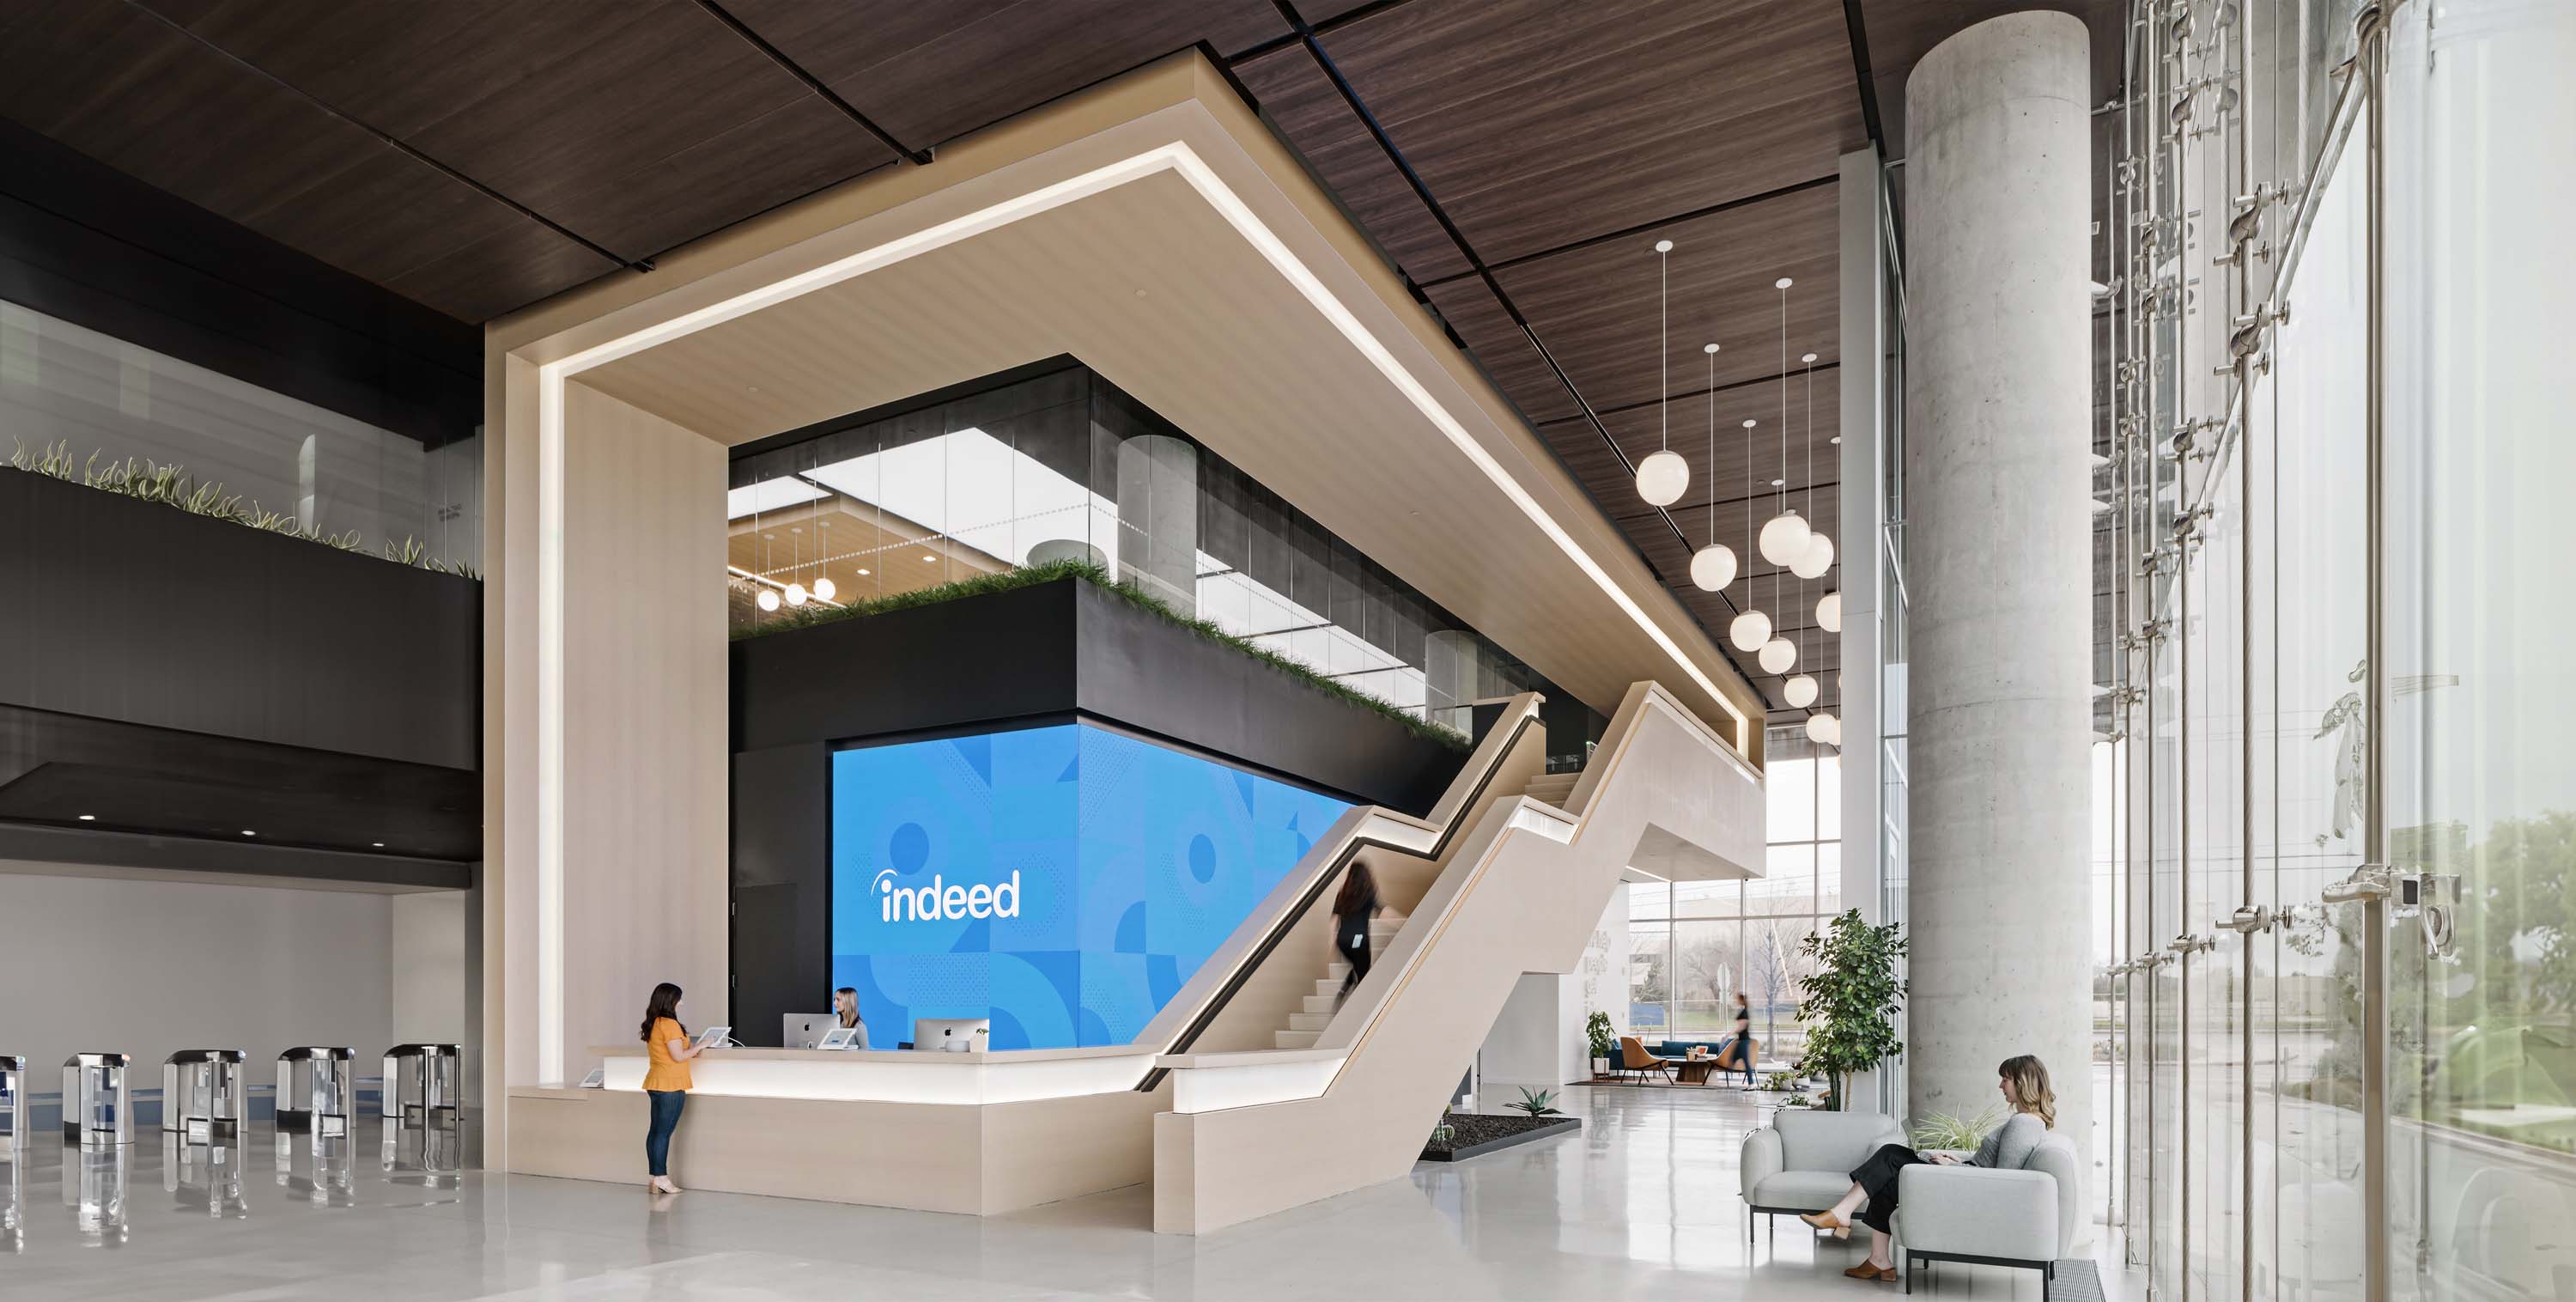 Indeed.com in Austin, Texas by Specht Novak Architects, shot by Andrea Calo, framed by desk and staircase showcasing cool toned materials and open floorplan.